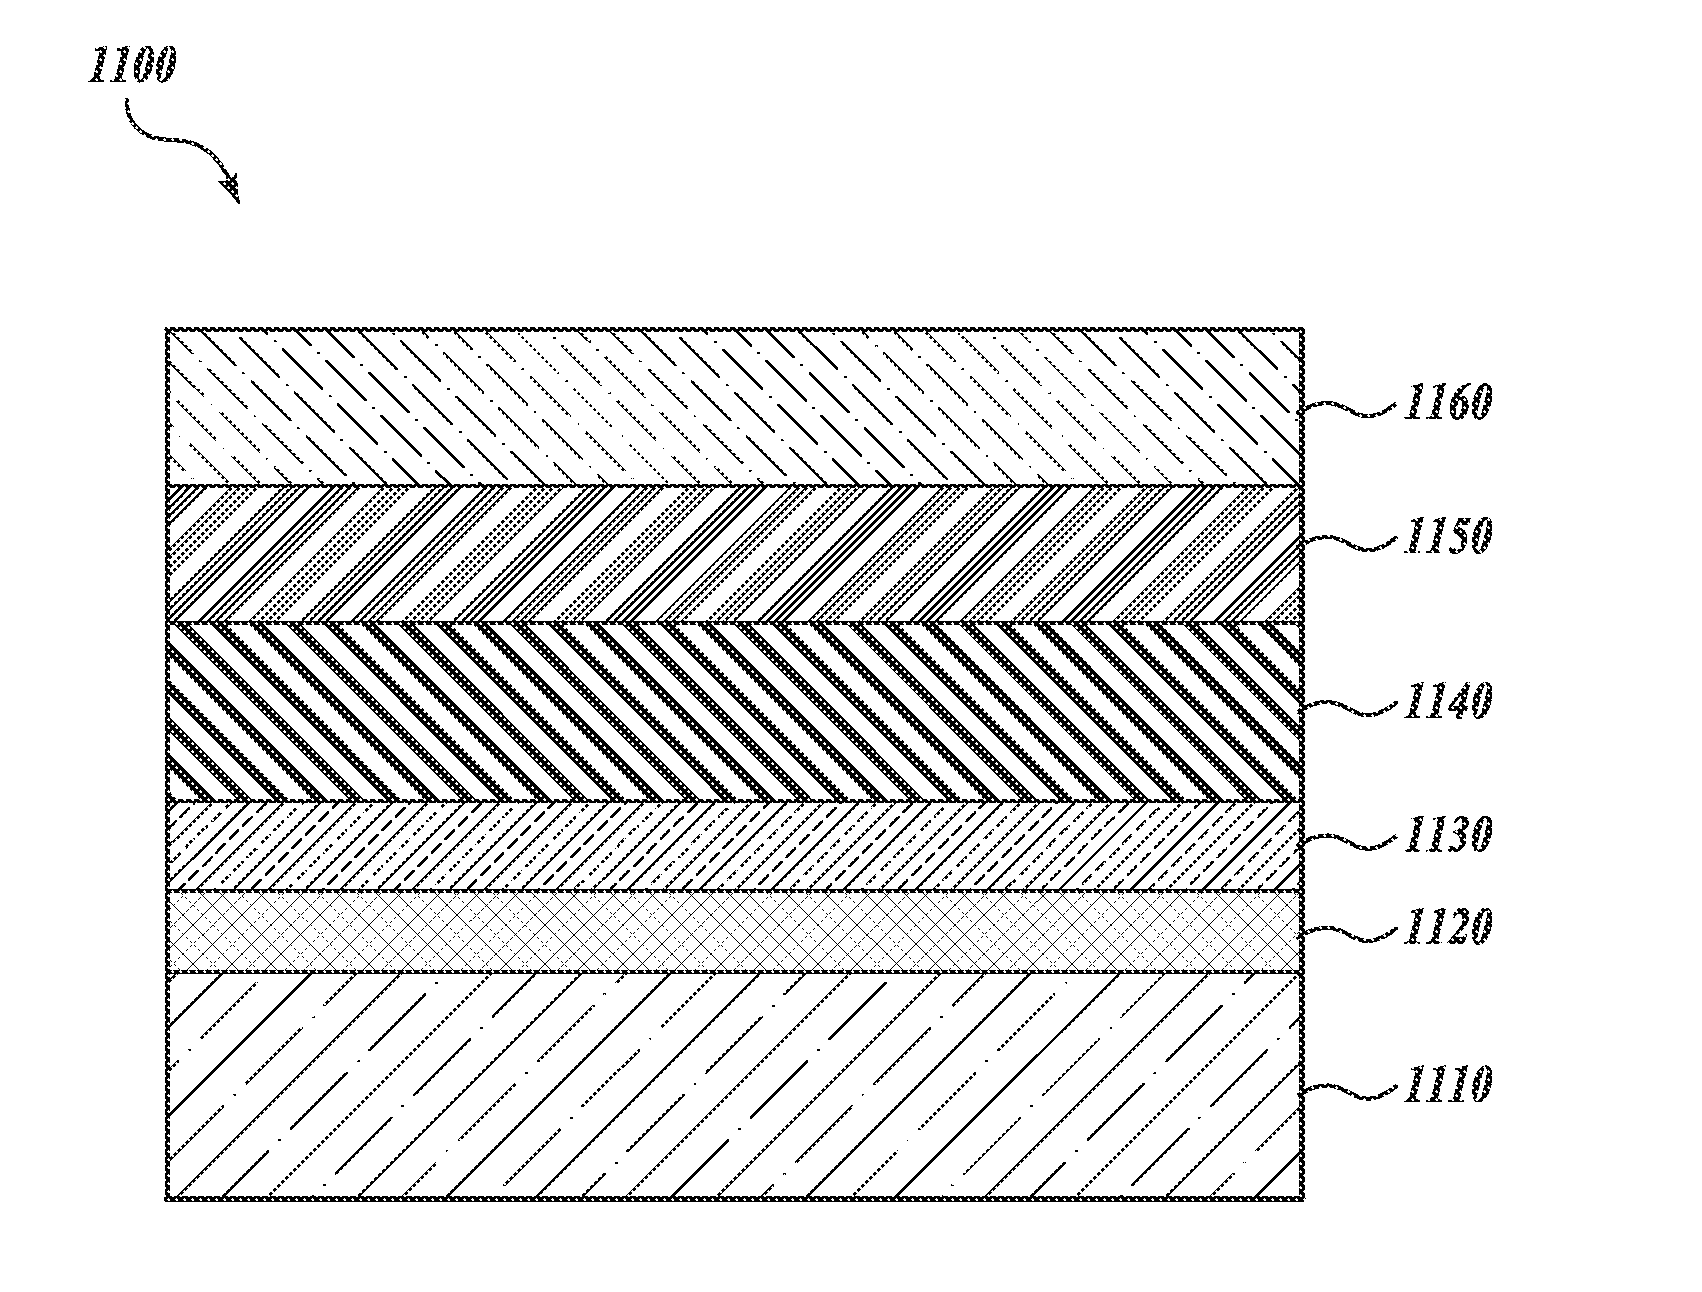 Poling structures and methods for producing electro-optic activity in organic nonlinear optical materials for electro-optic devices